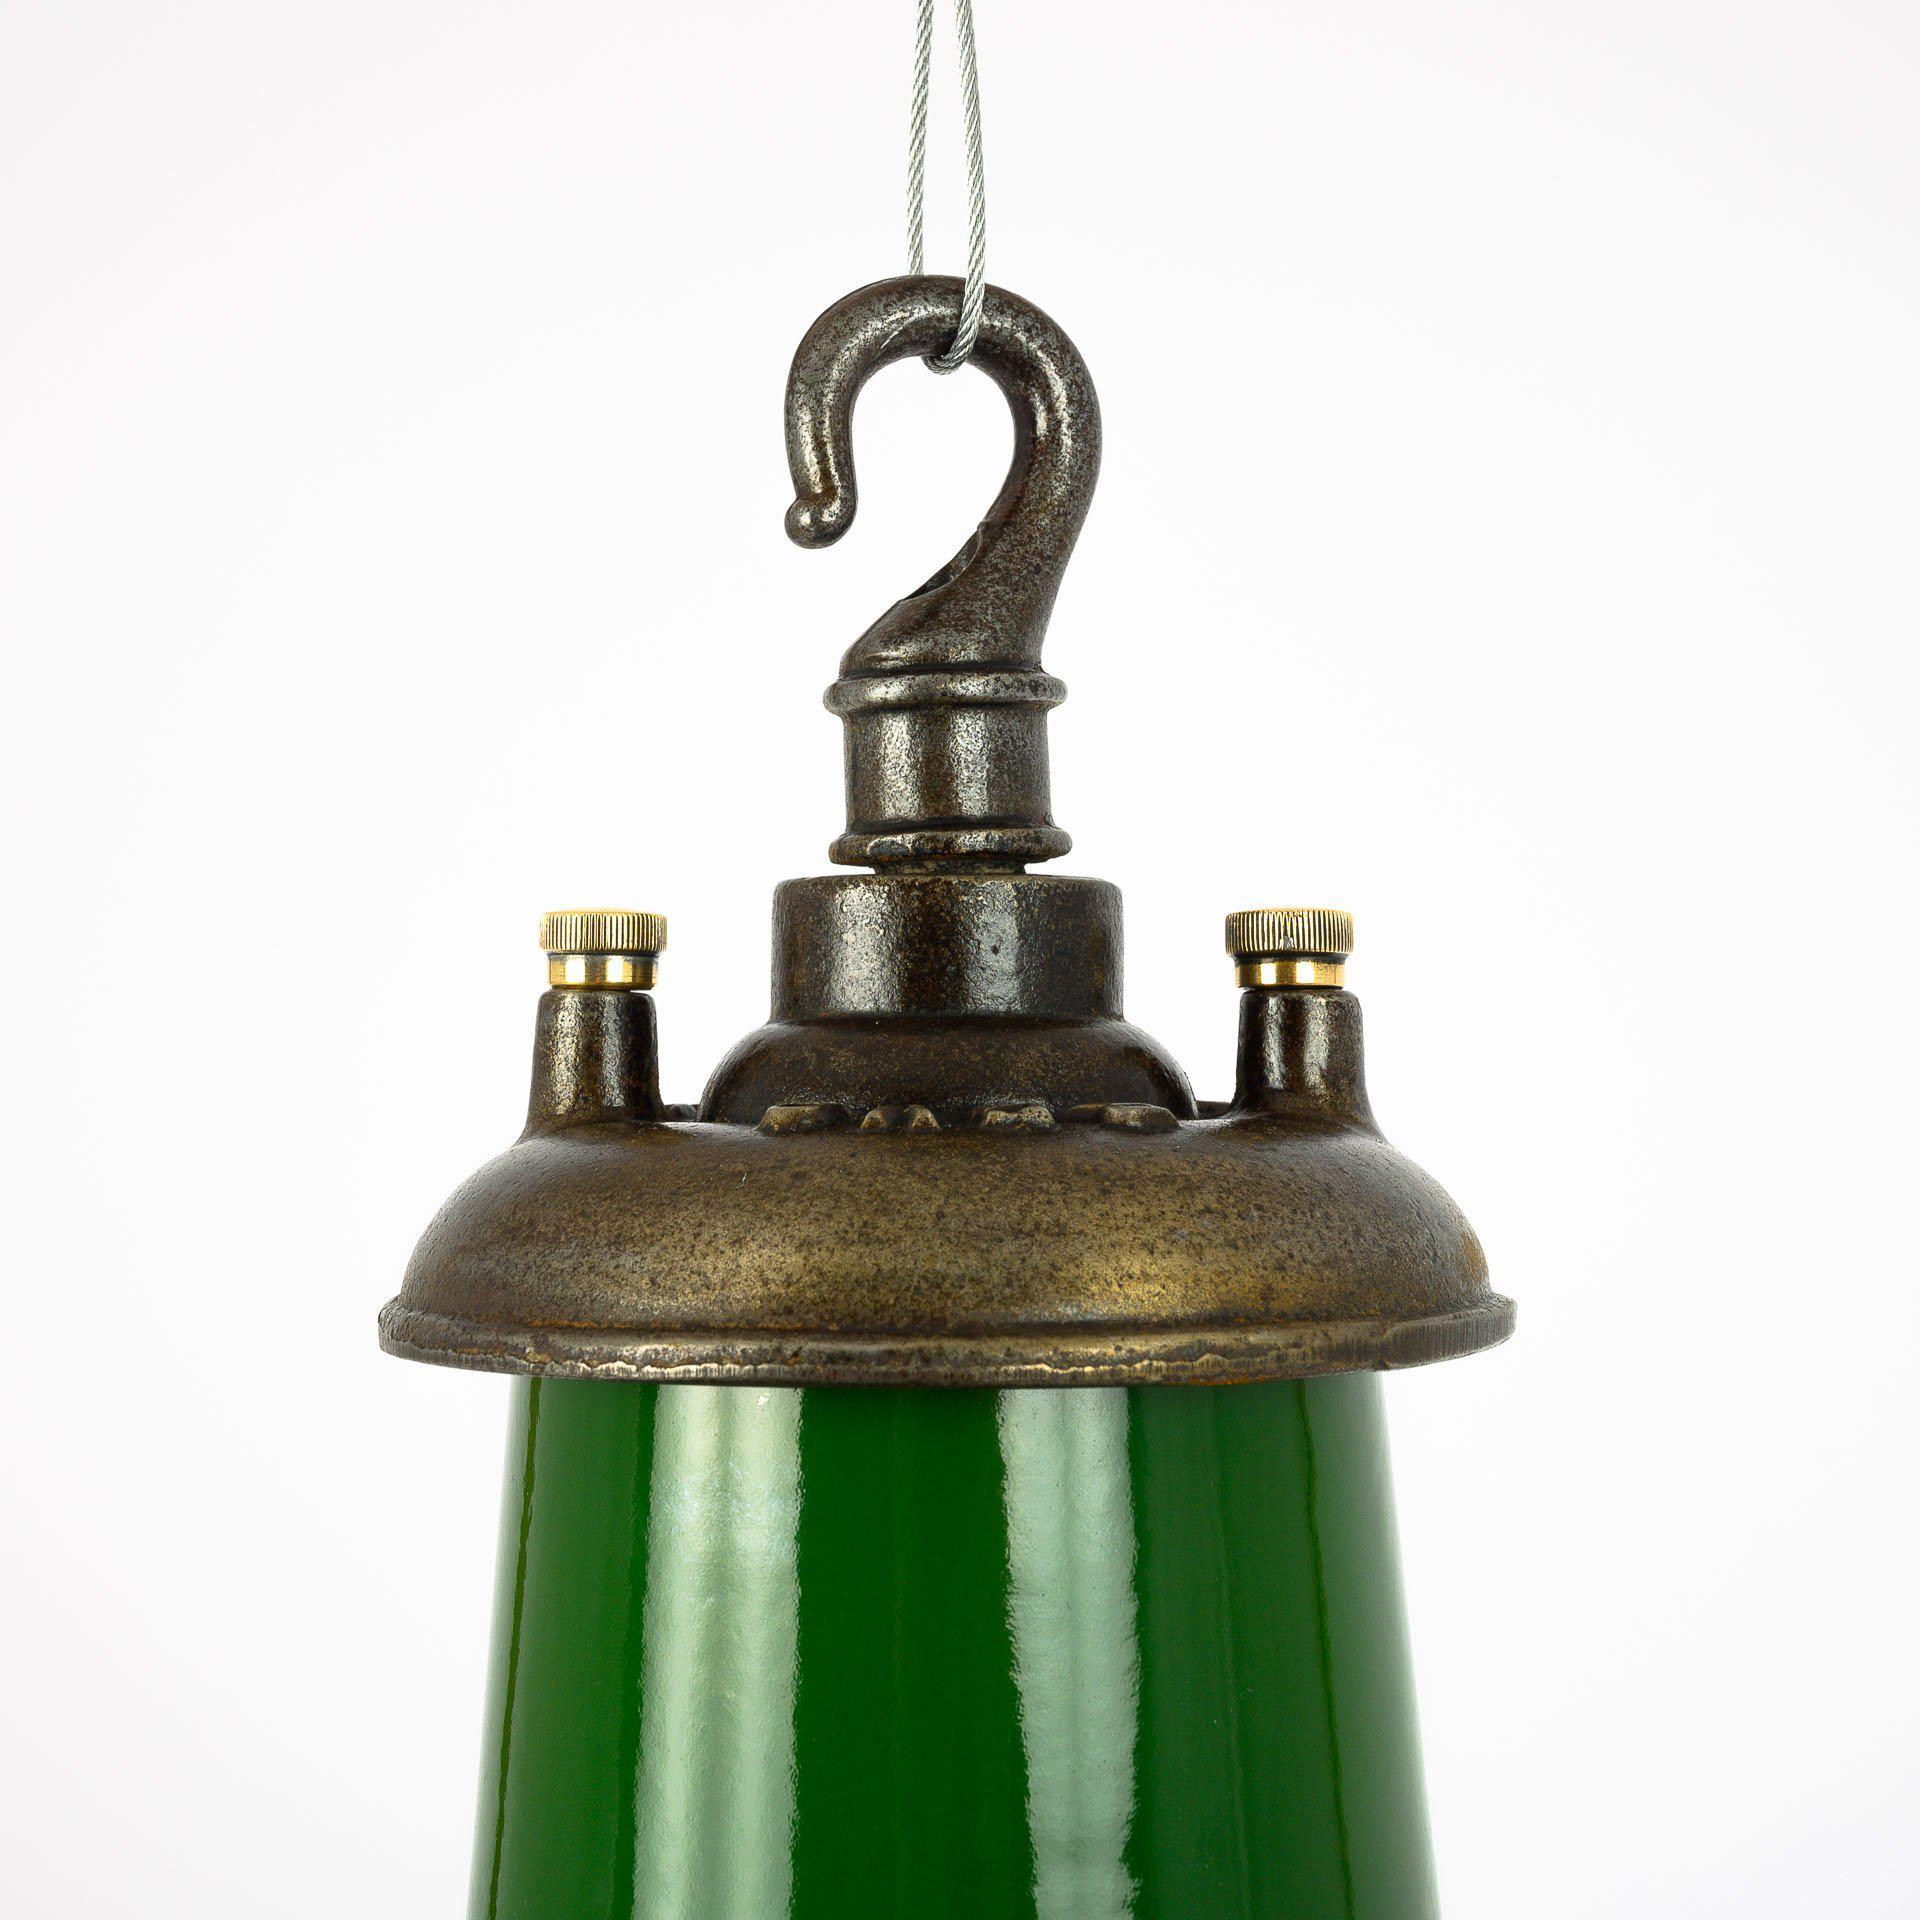 These are Original Industrial Green Enamel Factory Pendant Lights by Revo Tipton
A stunning run of 26 industrial factory lights manufactured by Revo of Tipton, England circa 1940.

These lights were salvaged from a tool factory based in the